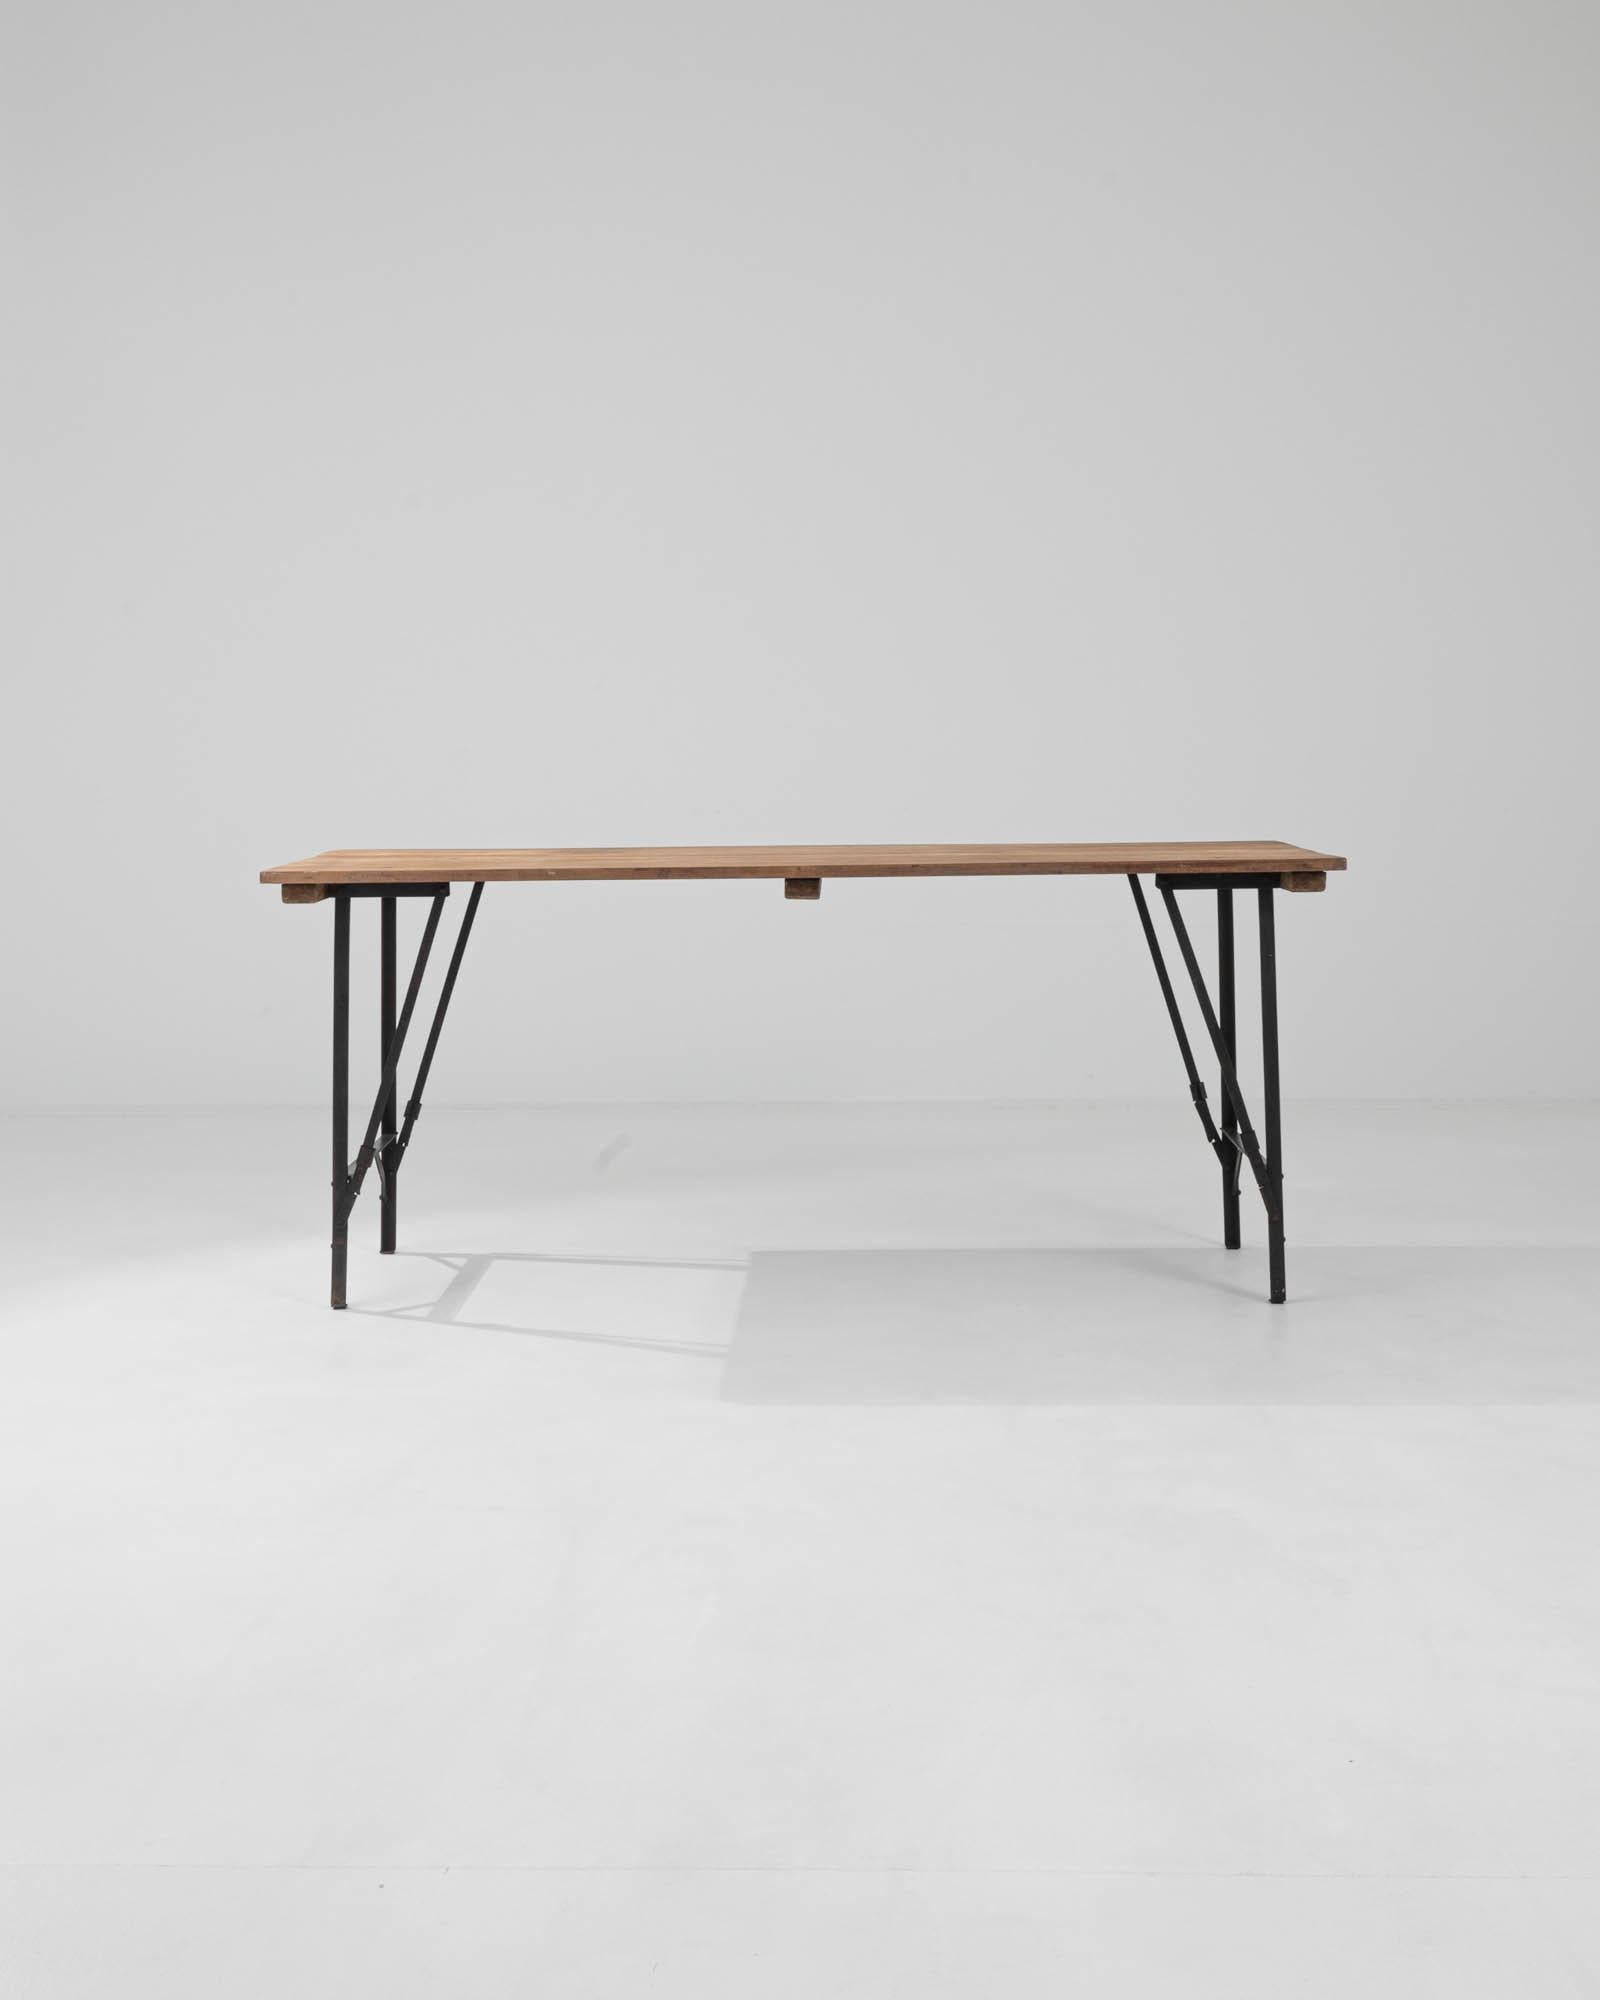 Simple yet marvelously versatile, this rustic table offers an attractive vintage accent. Built in Belgium in the 20th century, the lightweight form is composed of a tabletop of natural wooden boards set atop a slender metal frame. Hinged legs, held